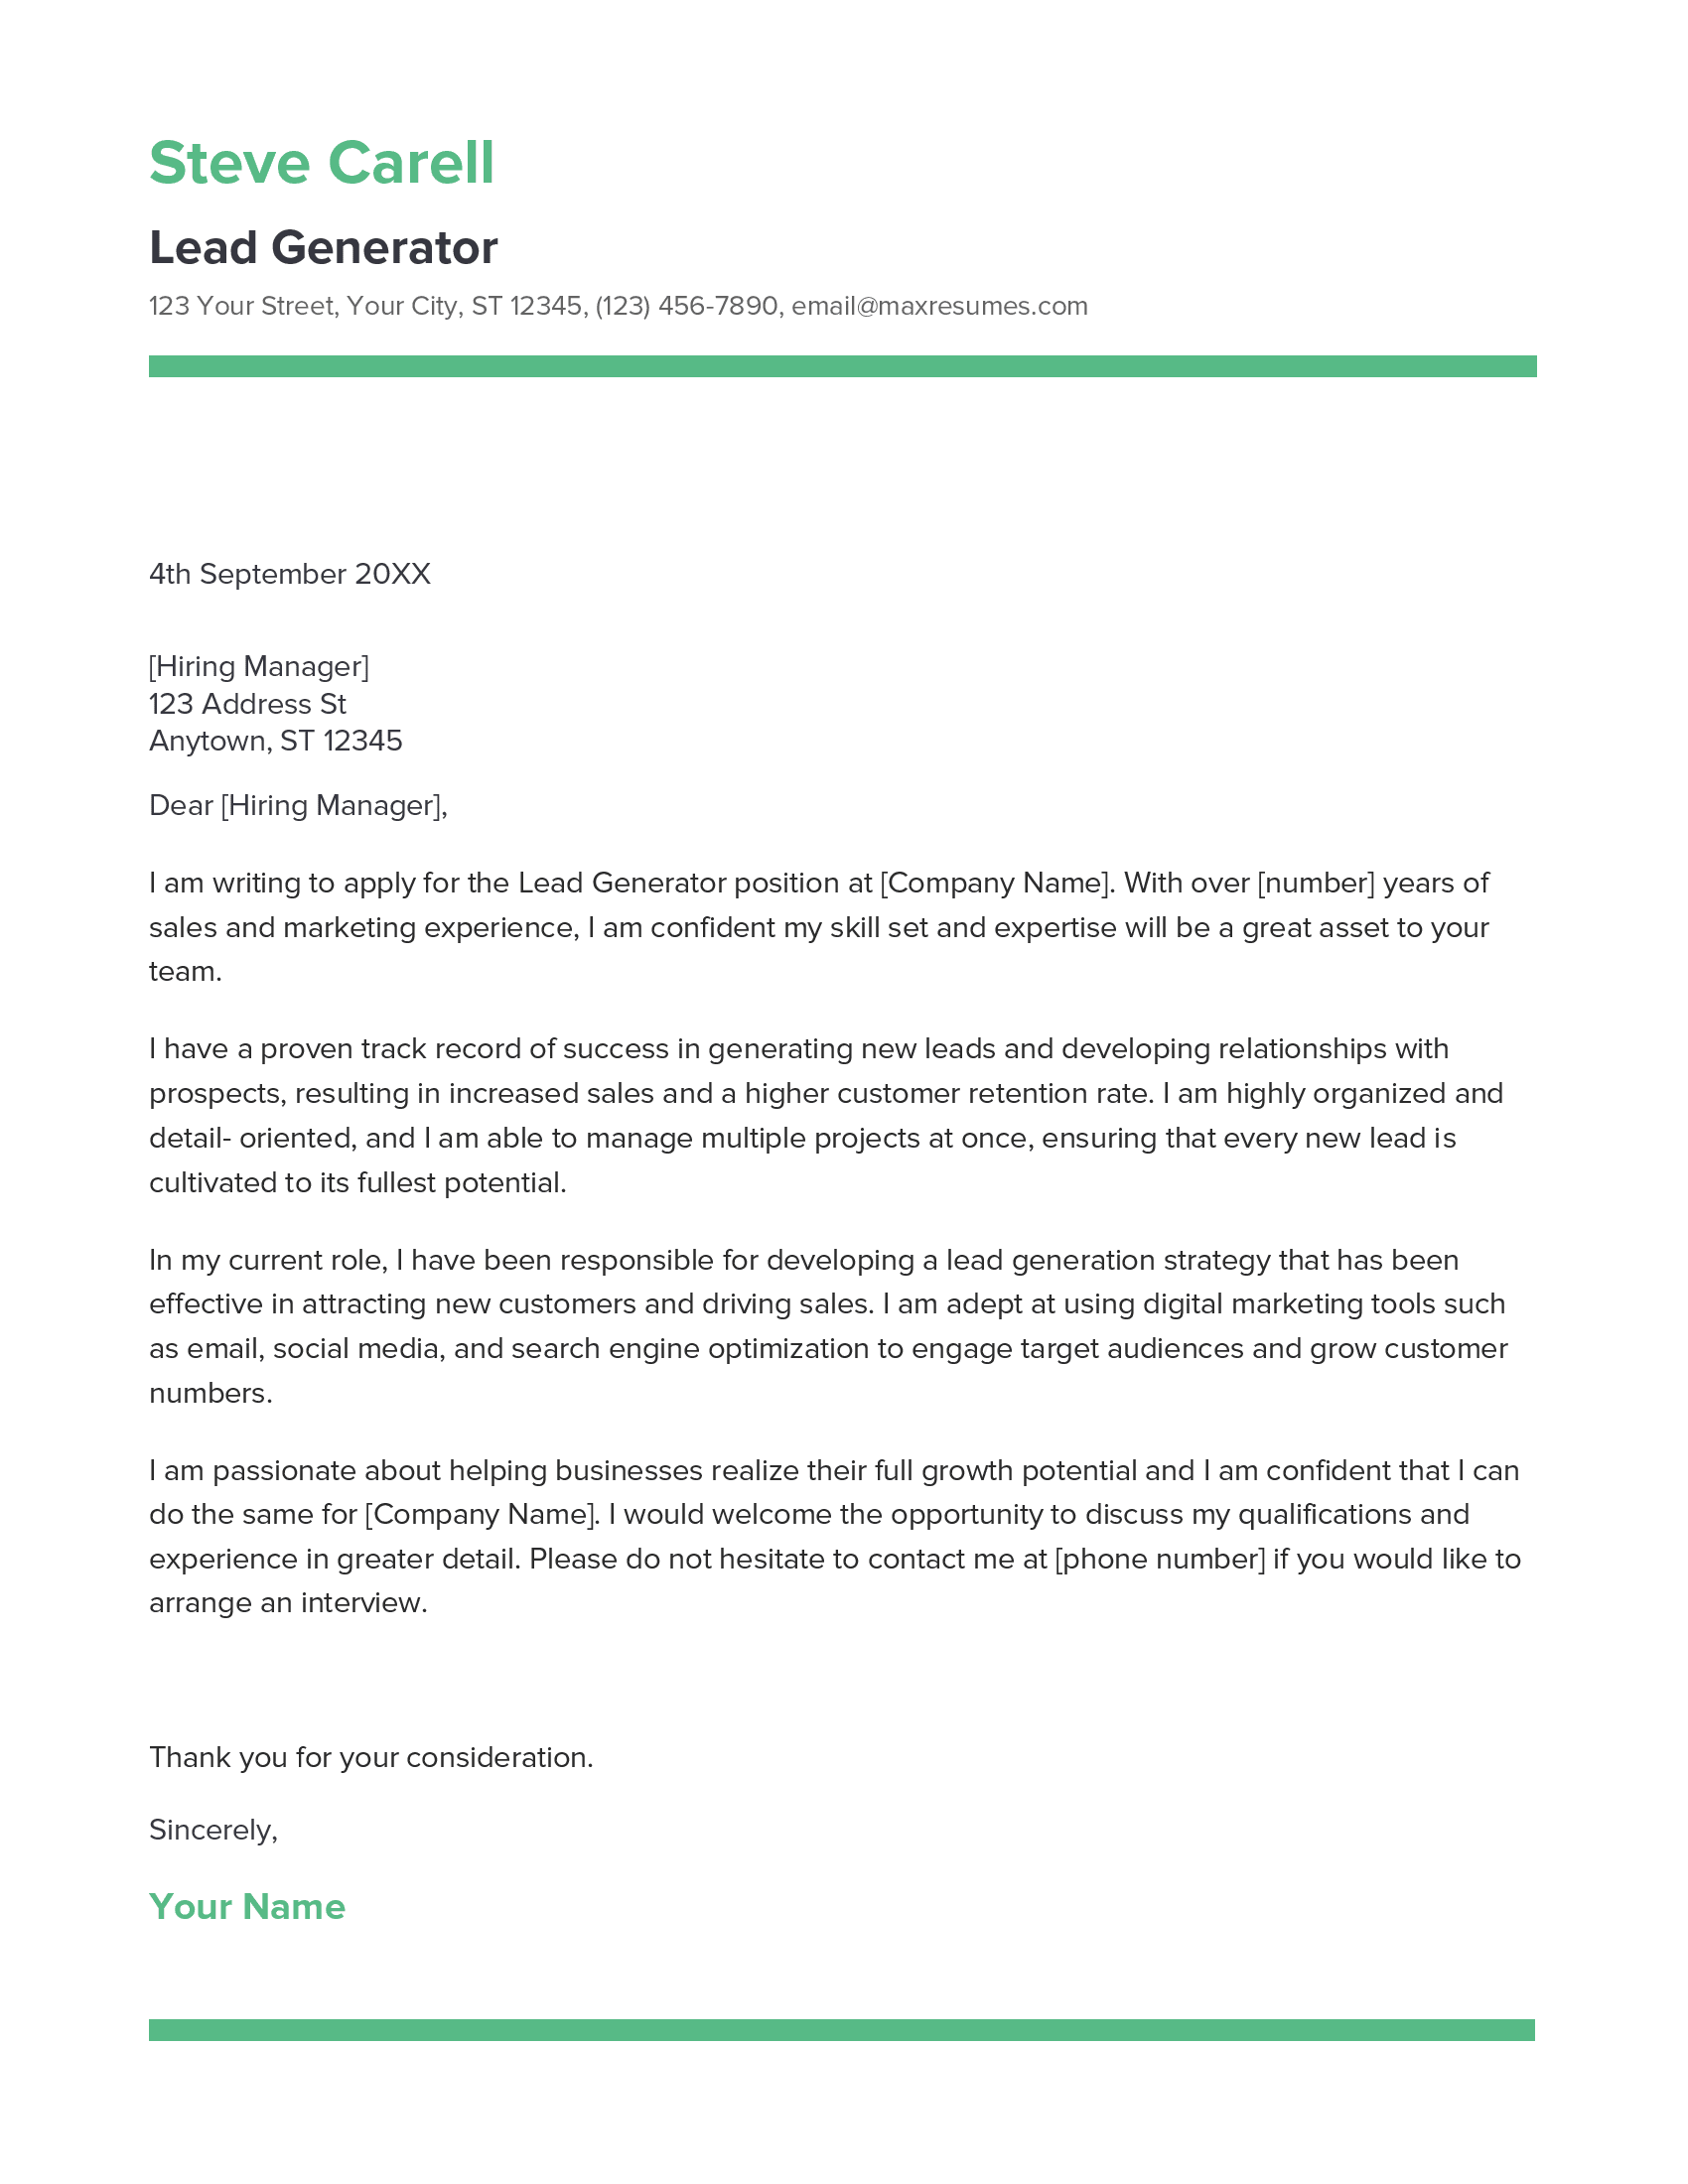 Lead Generator Cover Letter Example